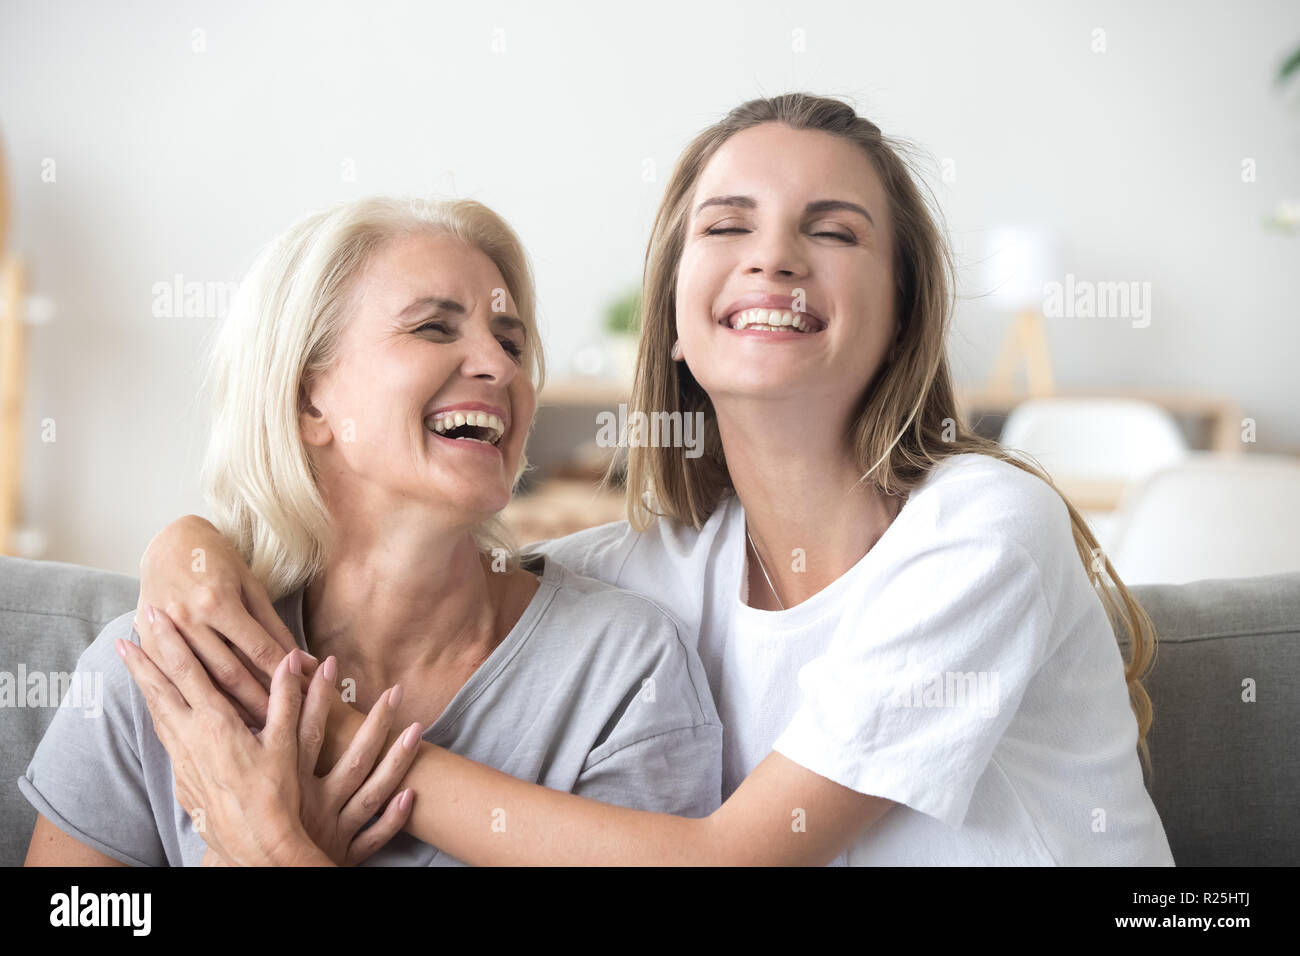 Happy senior mature mother embracing young adult woman laughing  Stock Photo